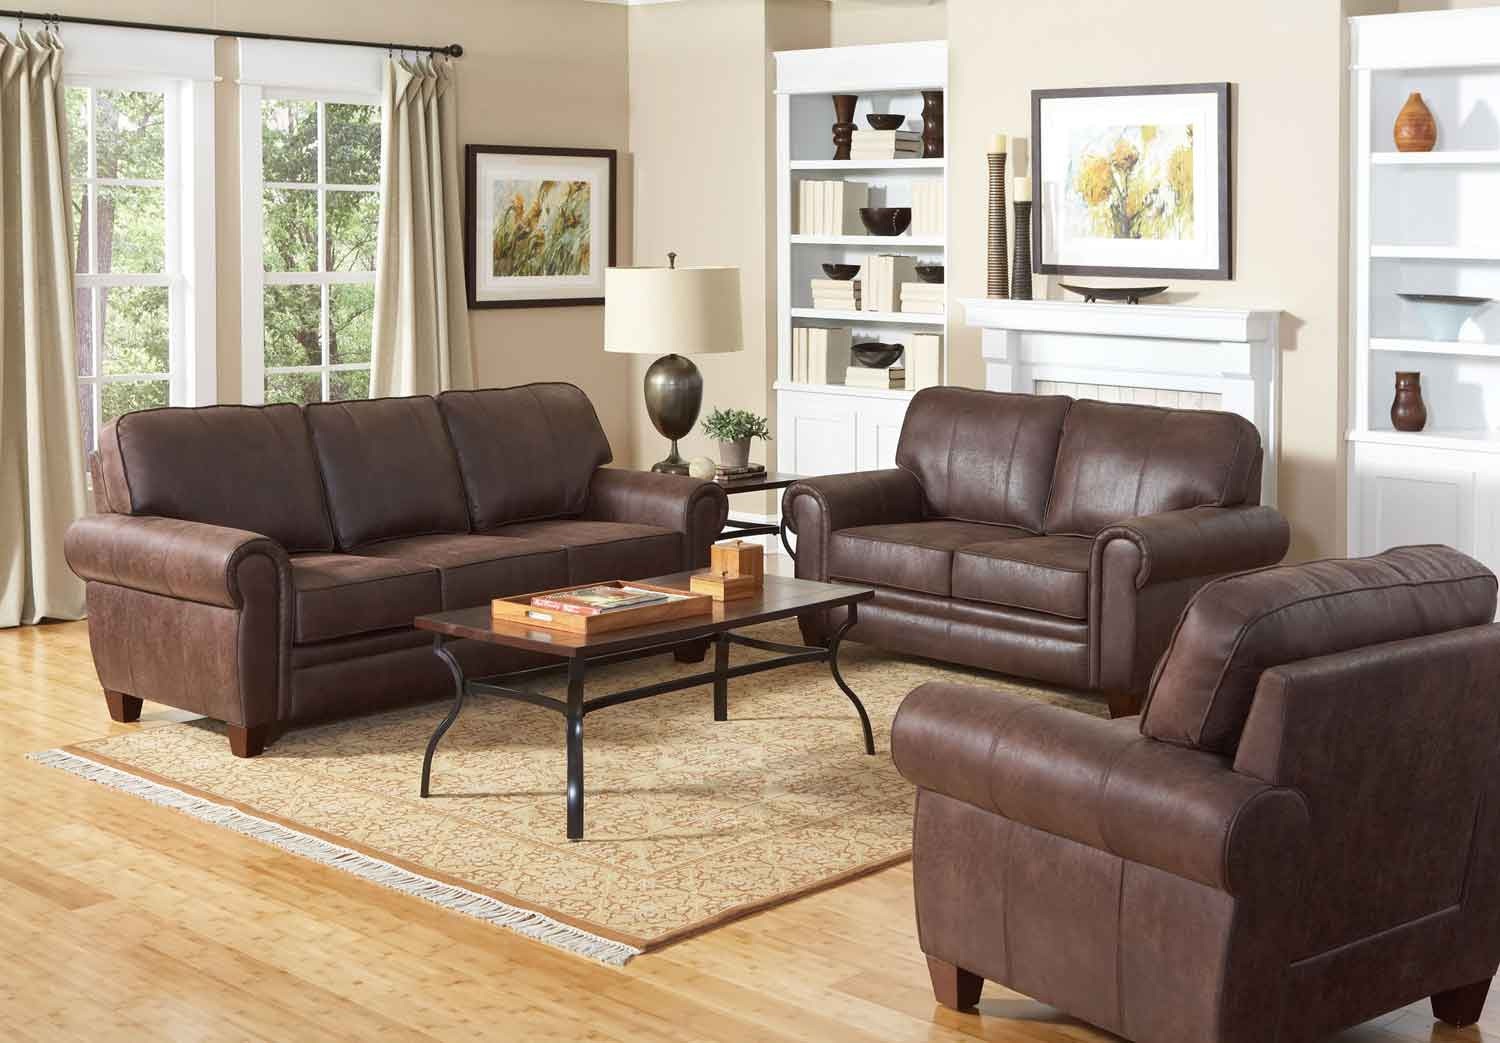 Brown Living Room Chairs
 Coaster Bentley Living Room Set Brown LivSet at